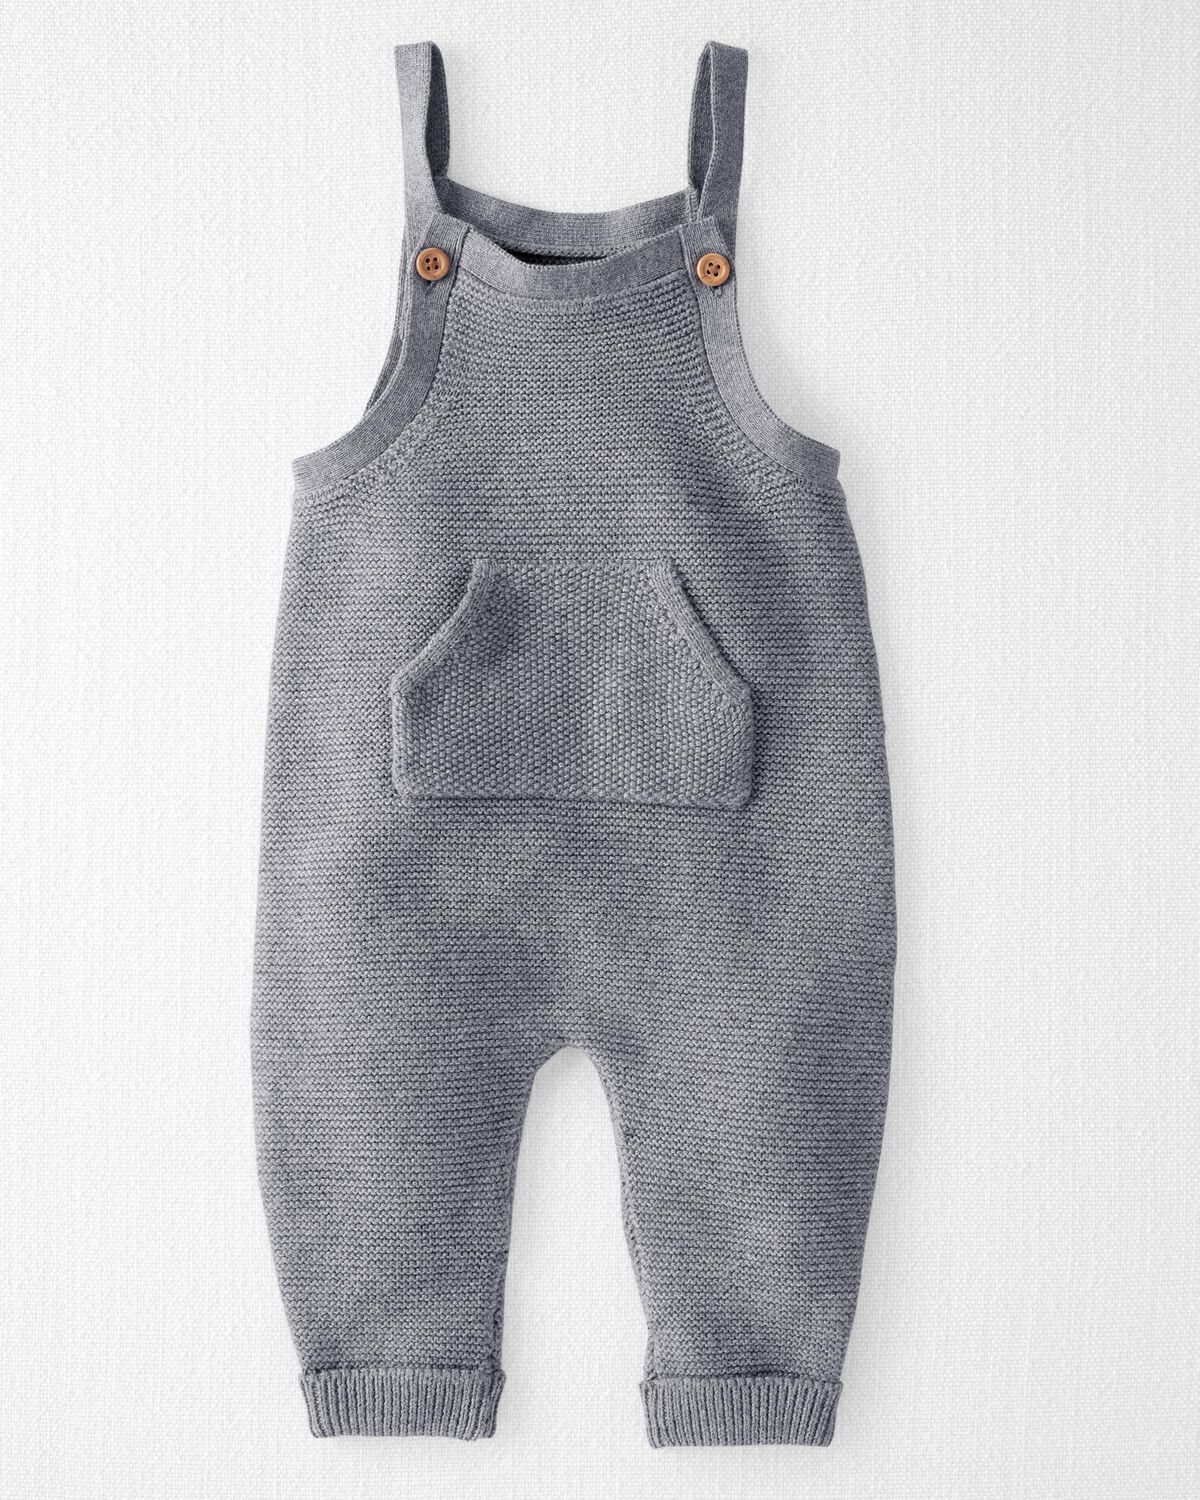 Snowy Gray Baby Organic Sweater Knit Overalls | carters.com | Carter's